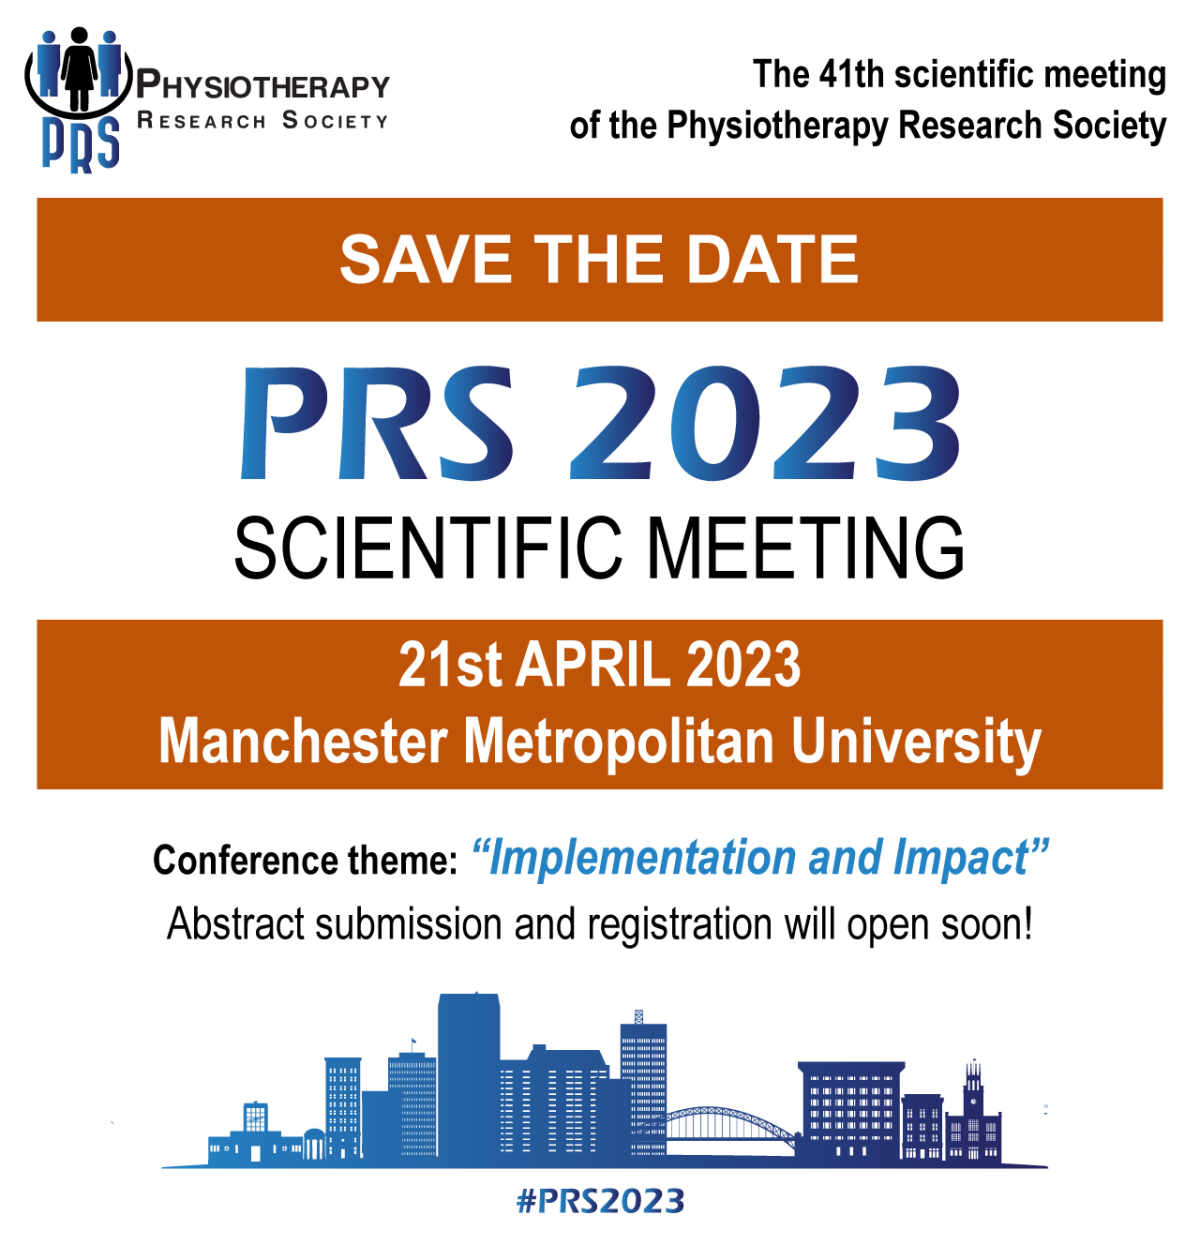 Save the date for #PRS2023